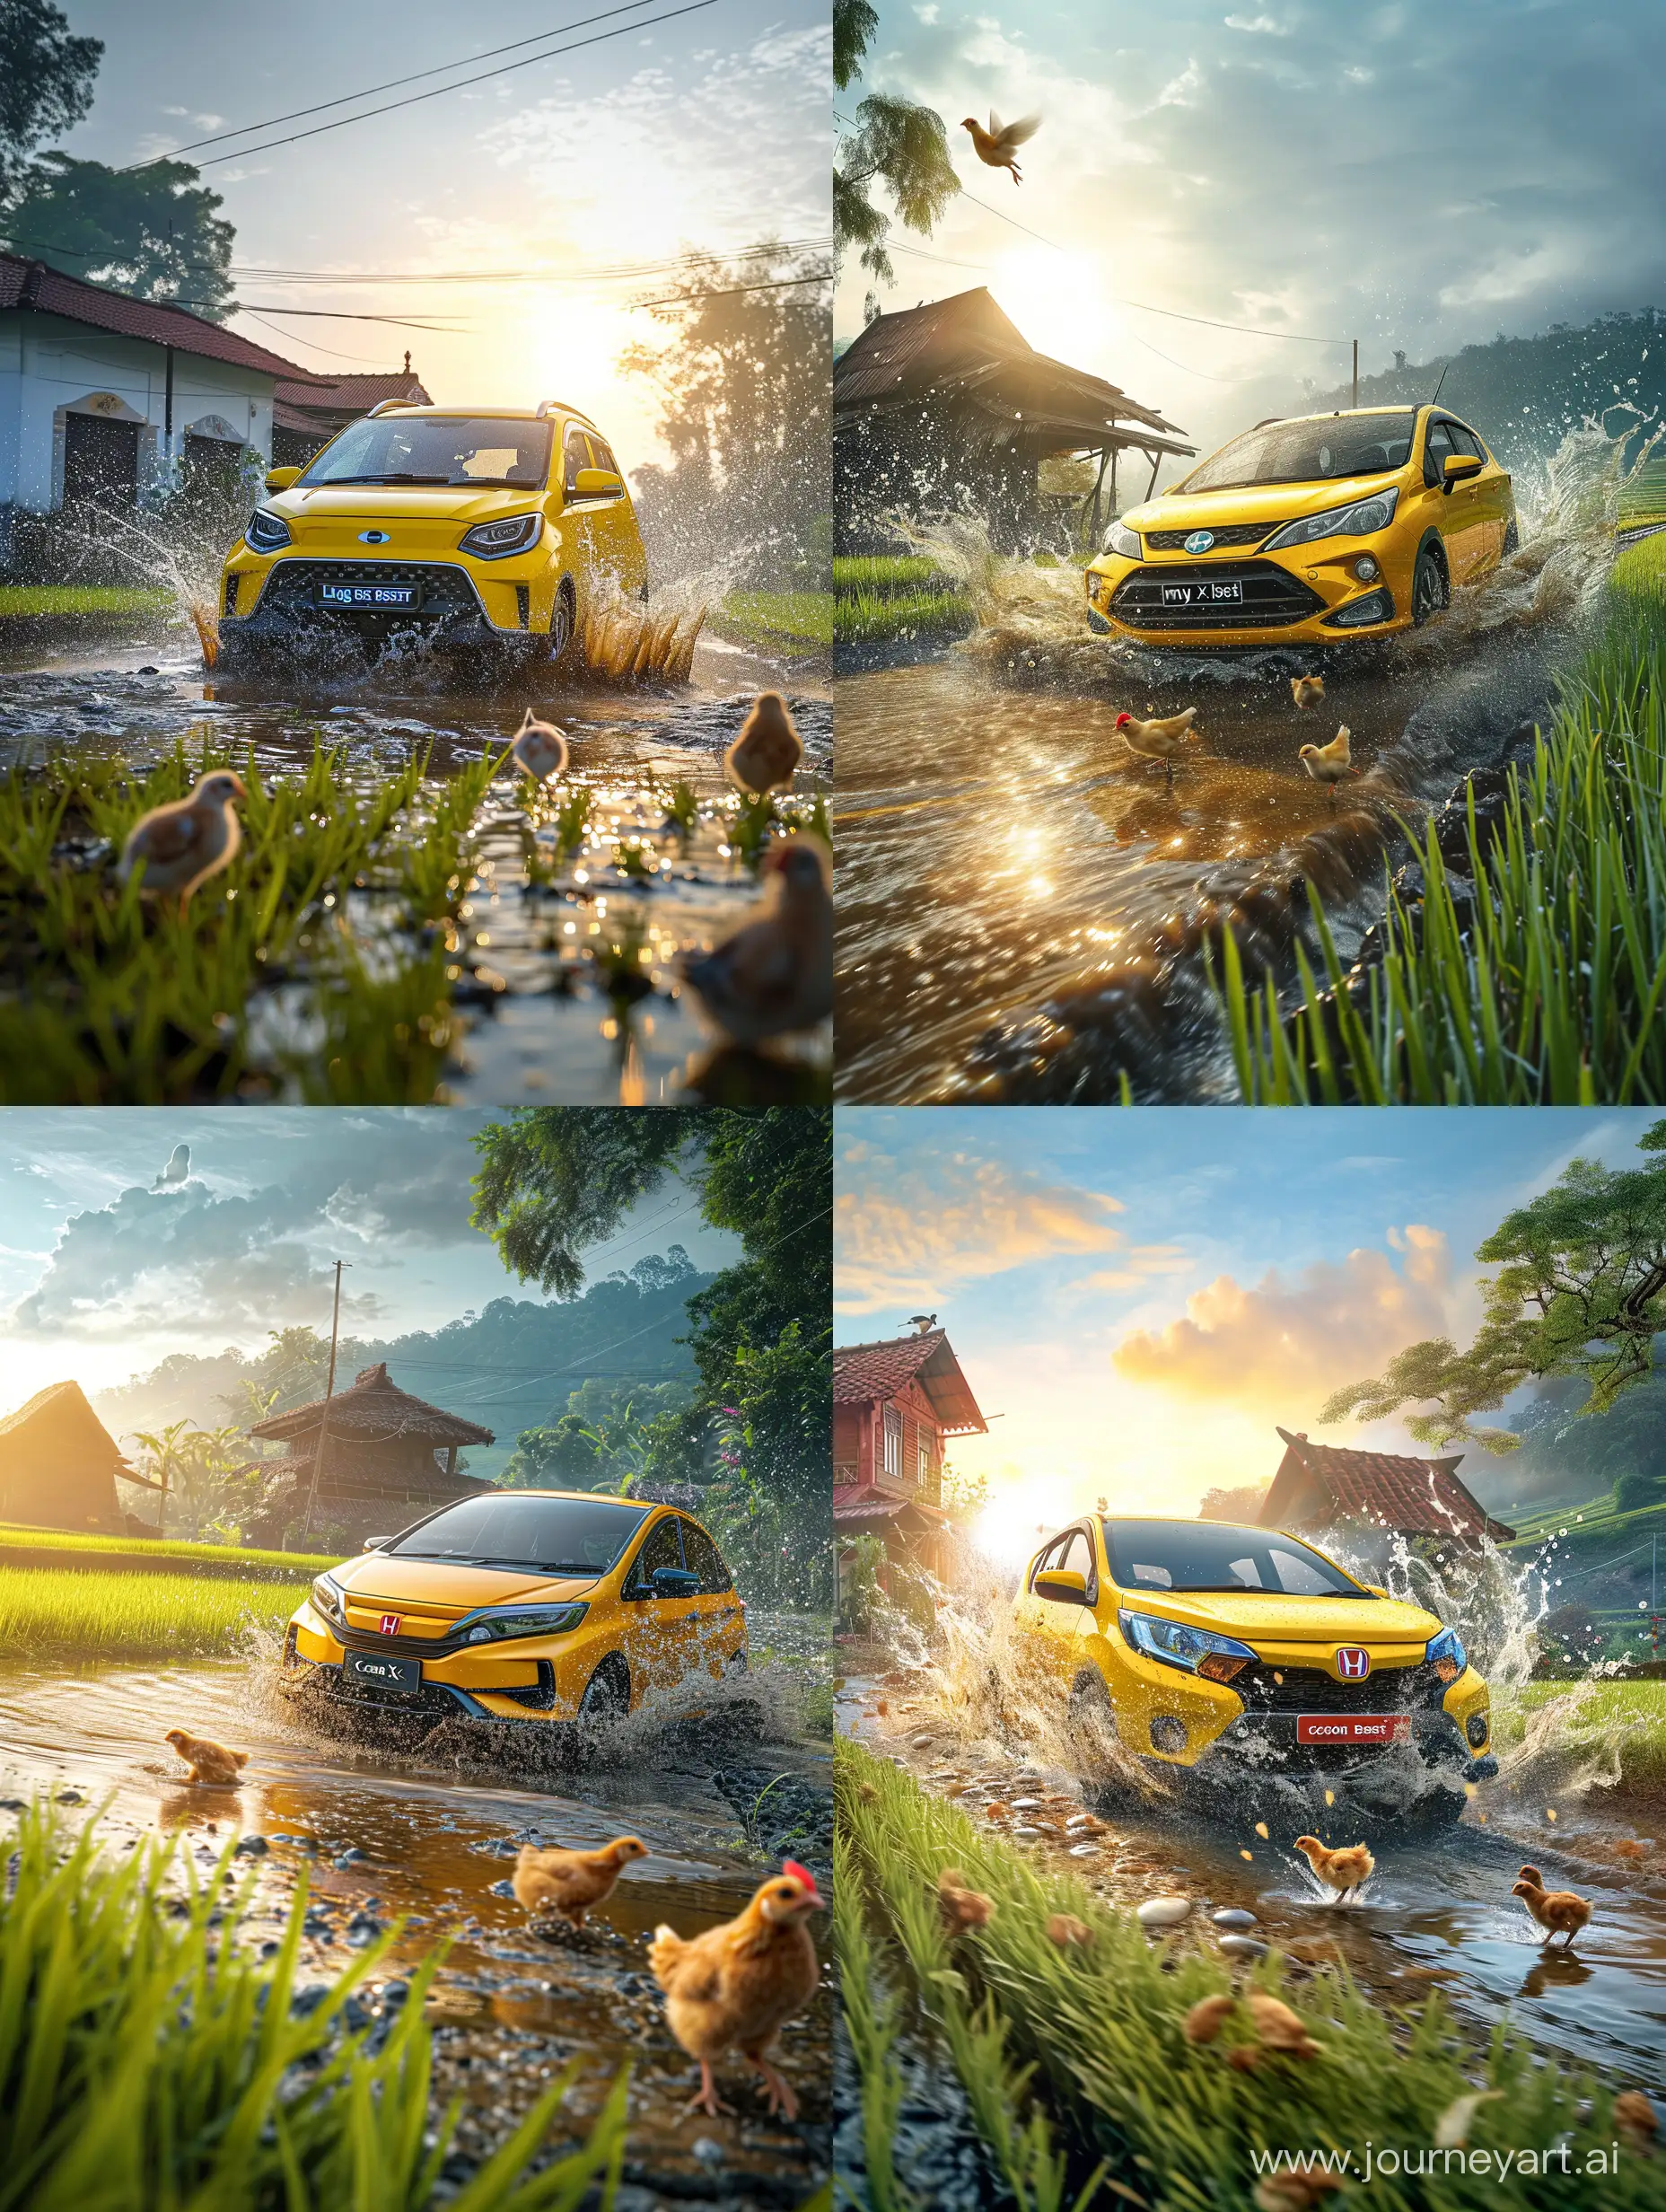 Ultra realistic, a yellow malaysian car brand myvi 'lagi best' edition is going through a bumpy road. there is water splashing and chicks running. morning atmosphere in the village by the rice field. morning sun.. canon eos-id x mark iii dslr --v 6.0
